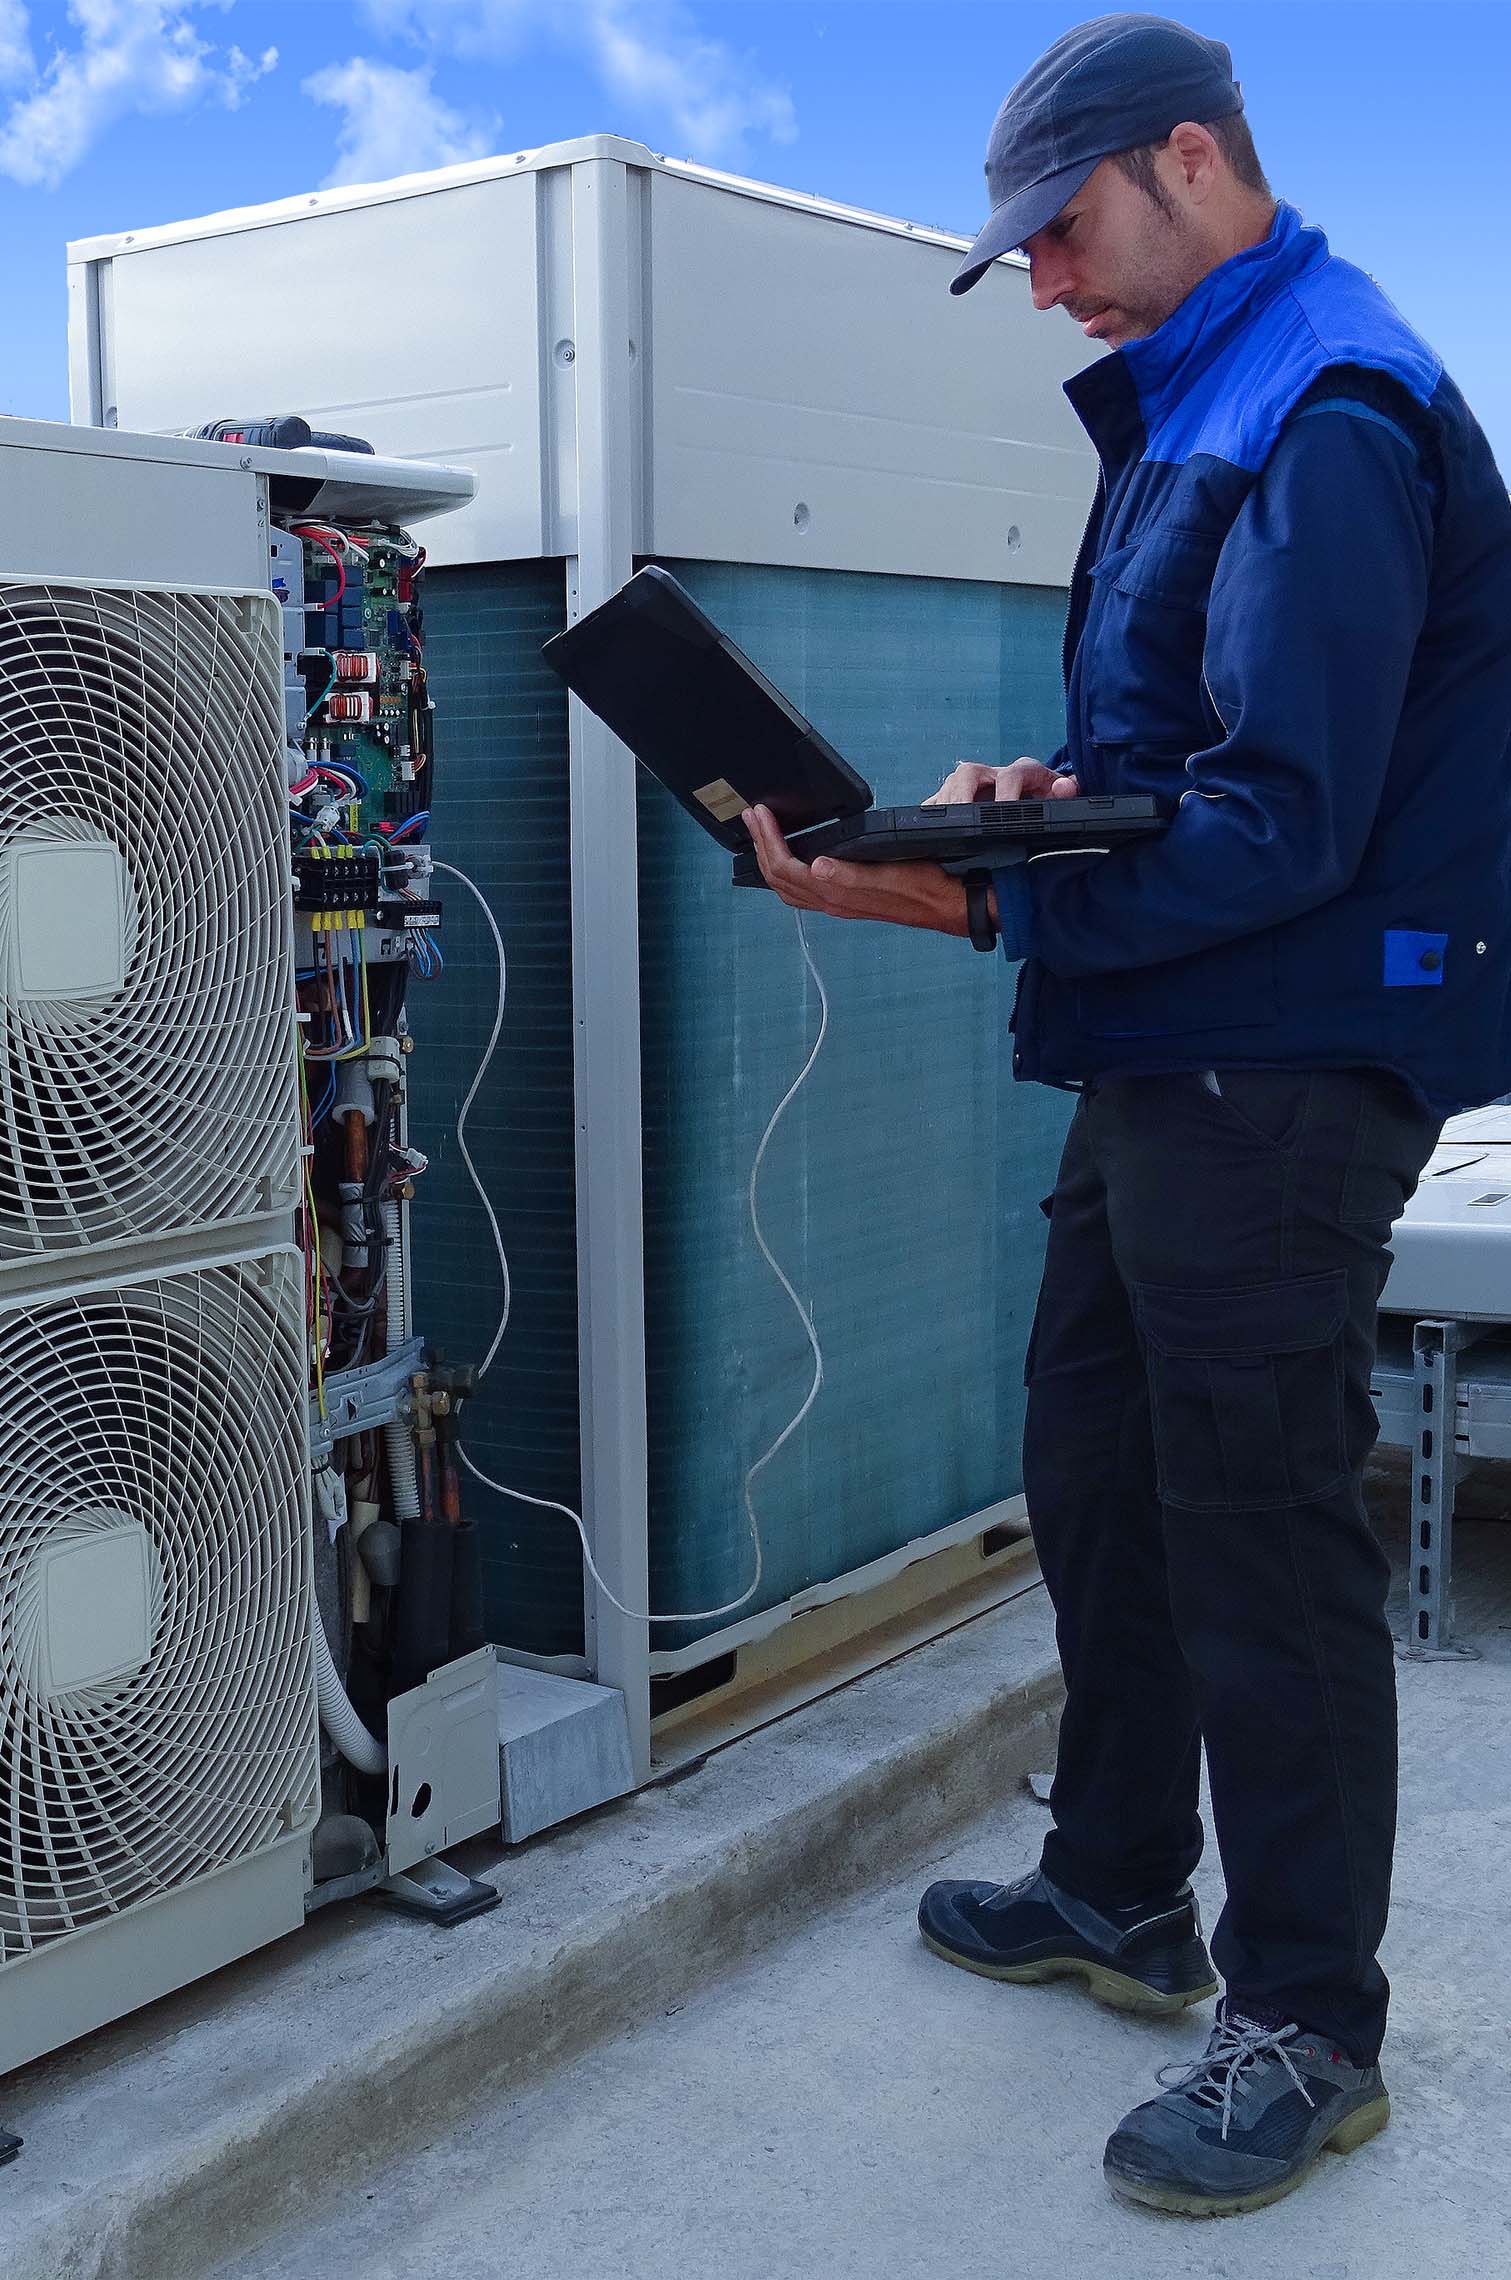 CLG Staff member checking a commercial air conditioning unit